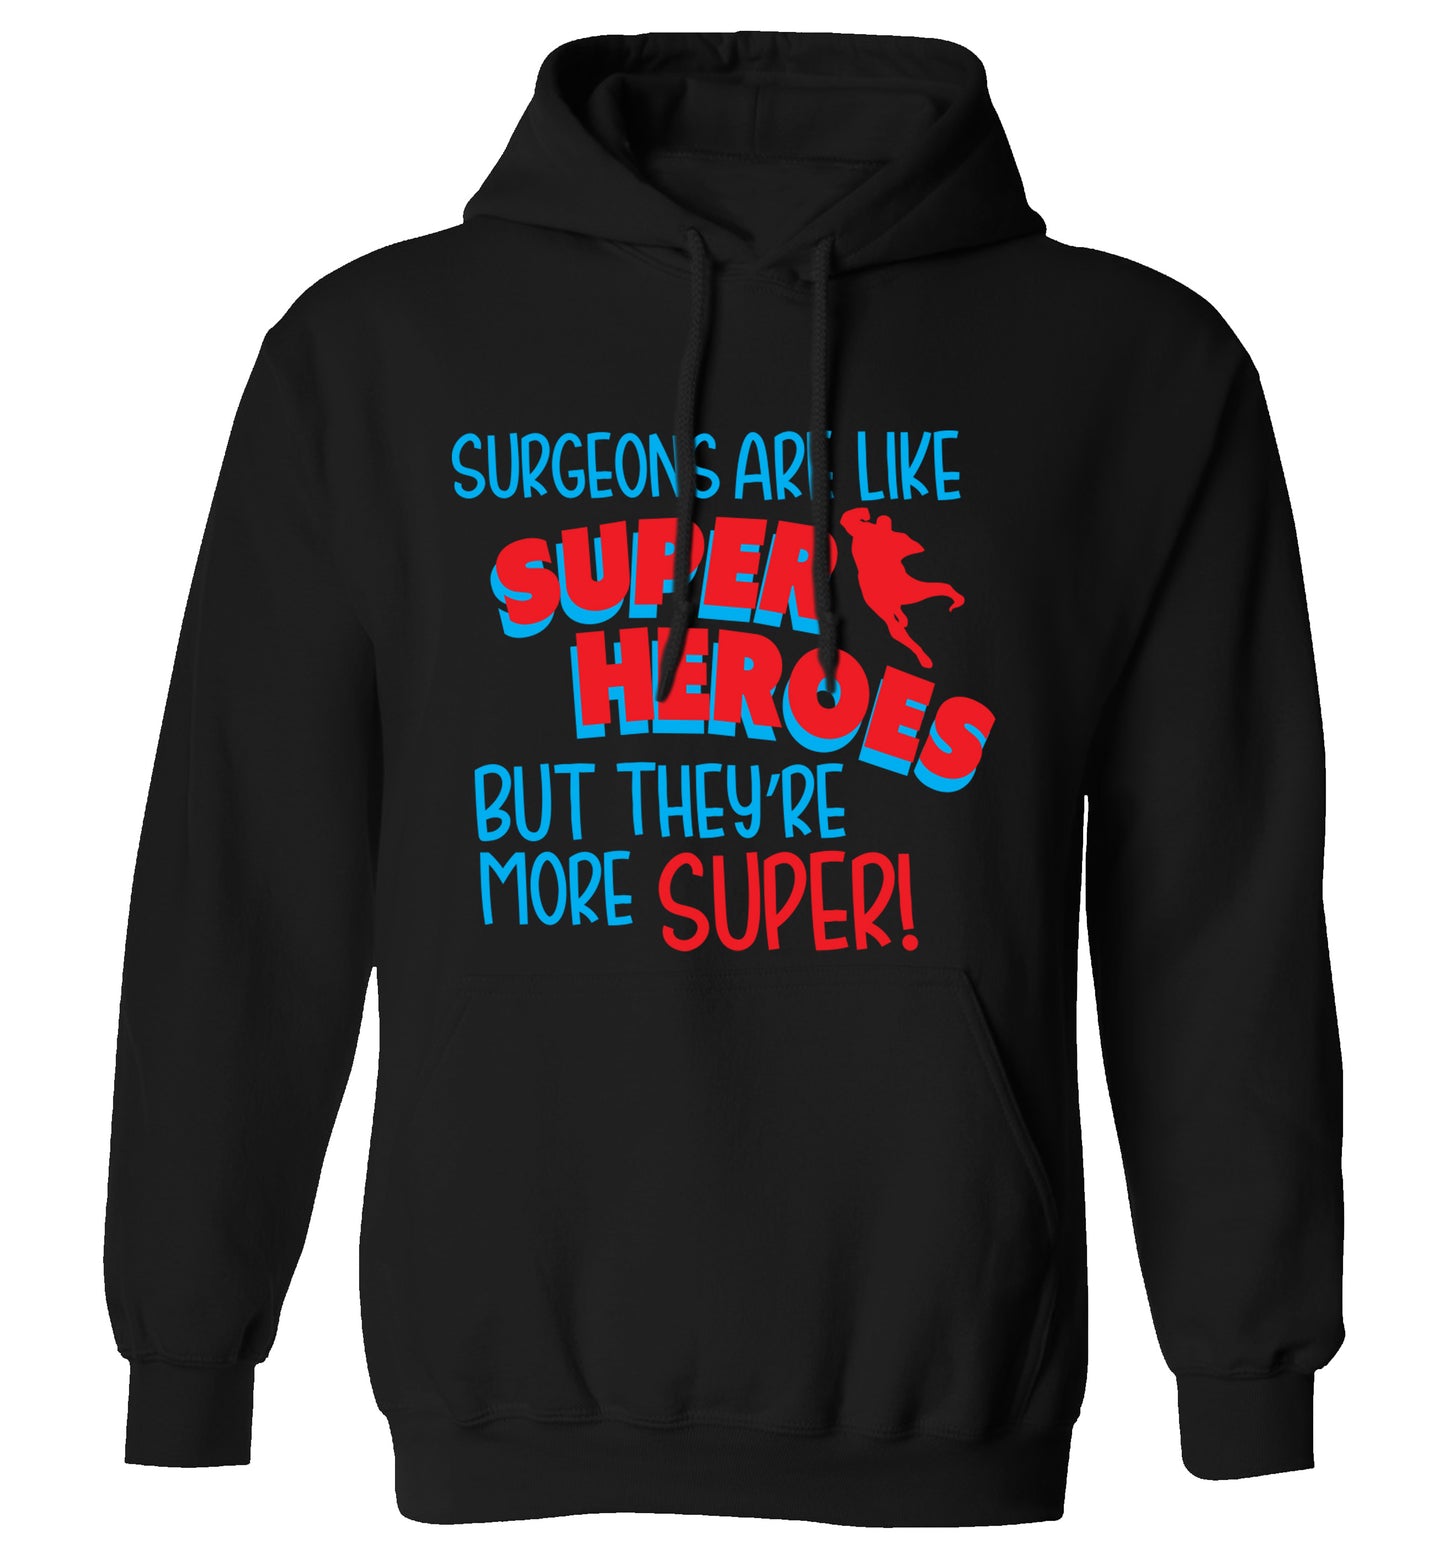 Surgeons are like superheros but they're more super adults unisex black hoodie 2XL